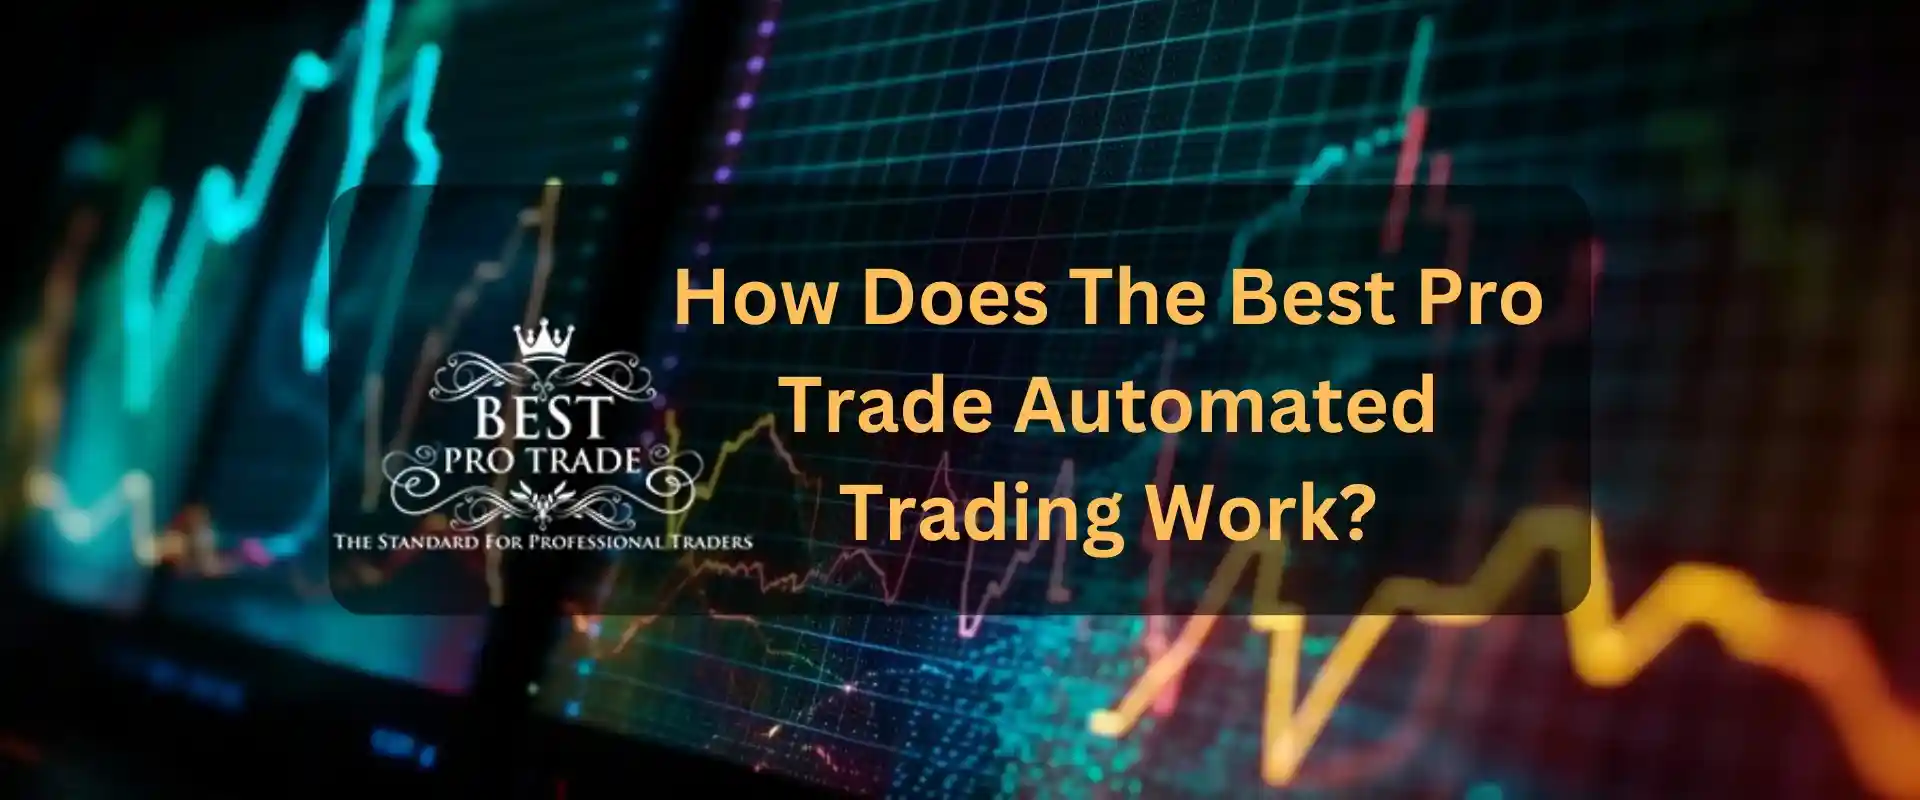 How Does The Automated Trading Work